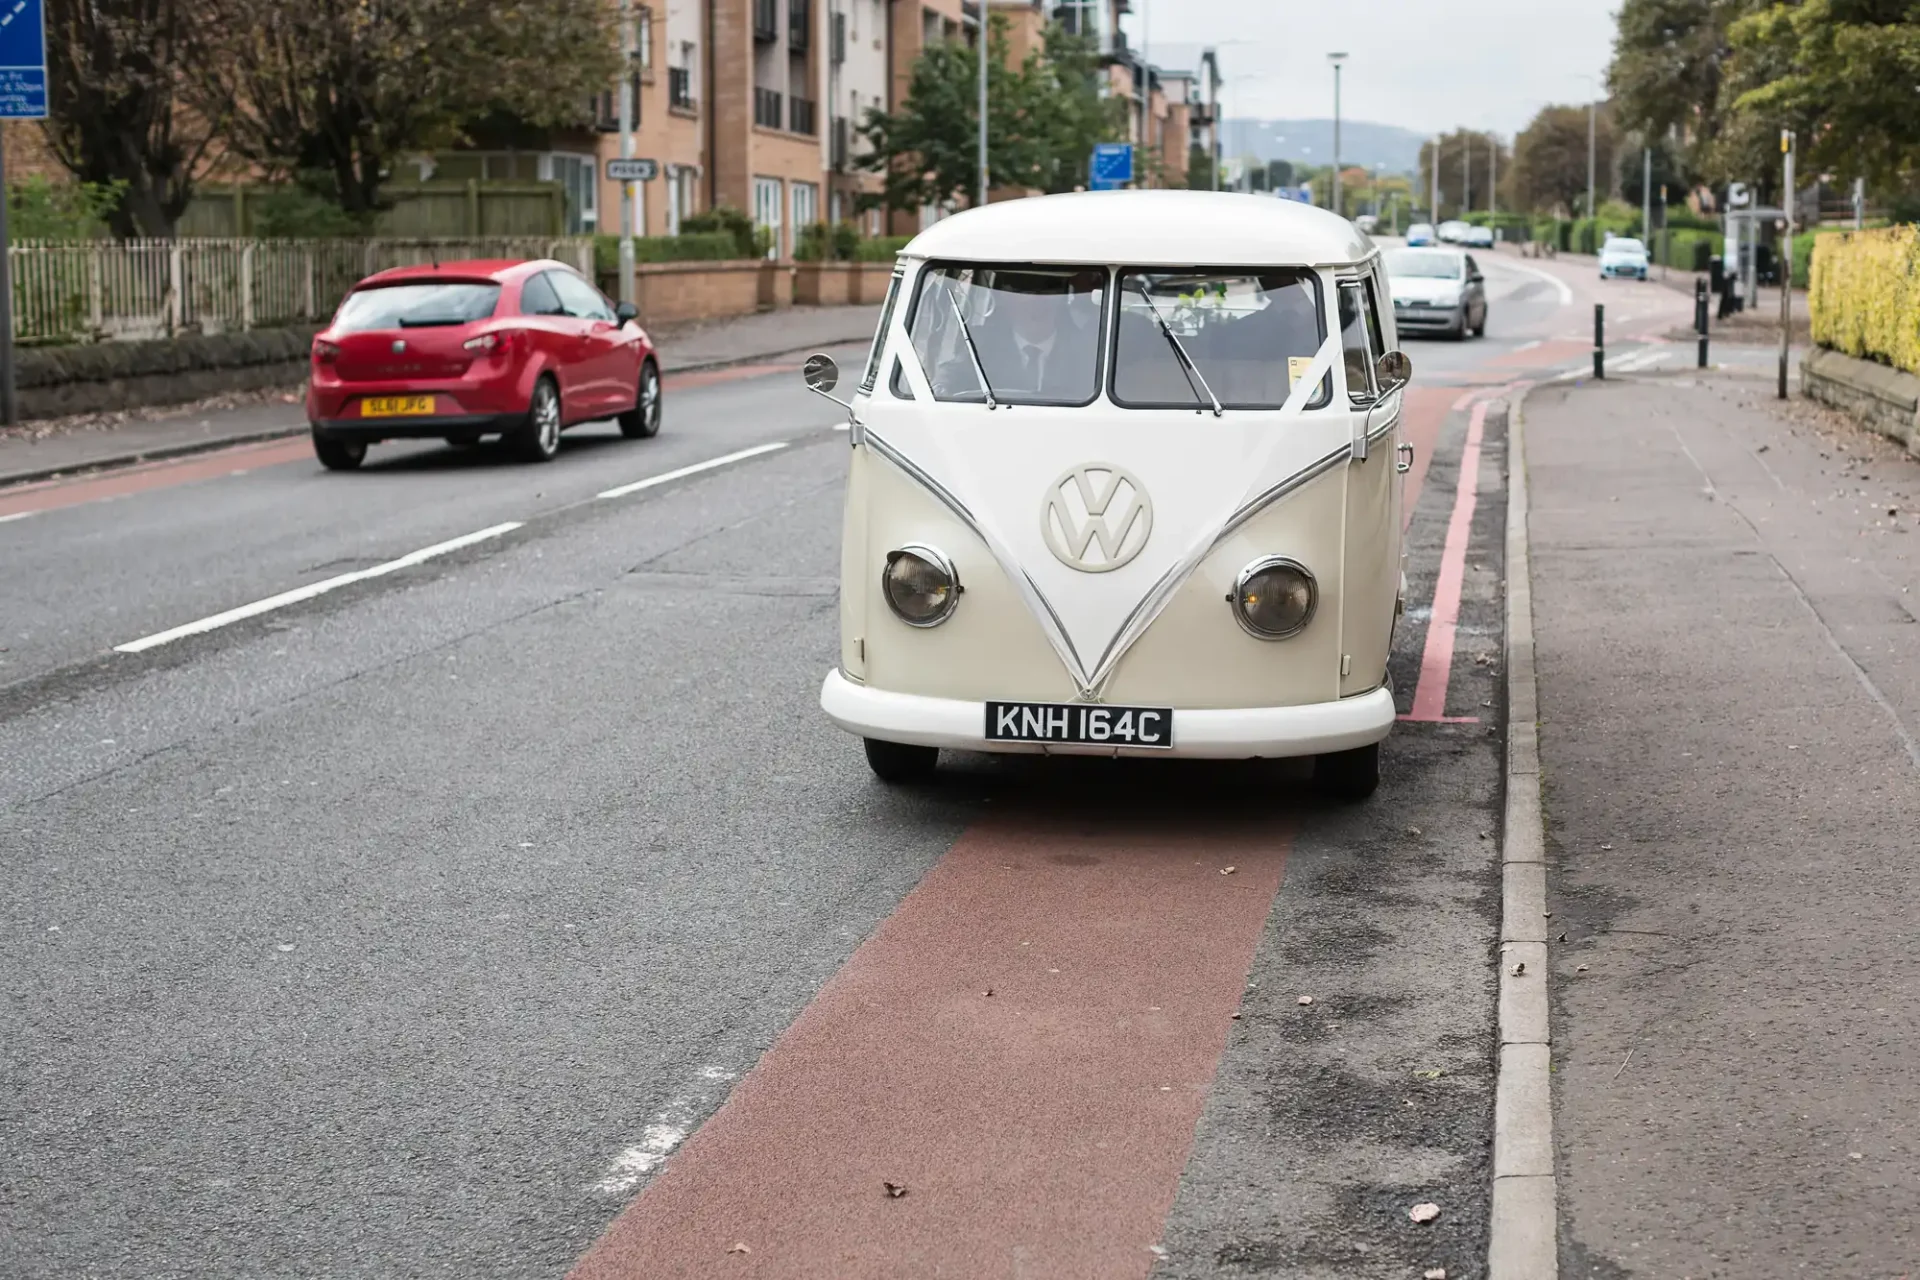 A vintage white volkswagen van parked on a city street with a red bike lane beside it. other cars and buildings are visible in the background.